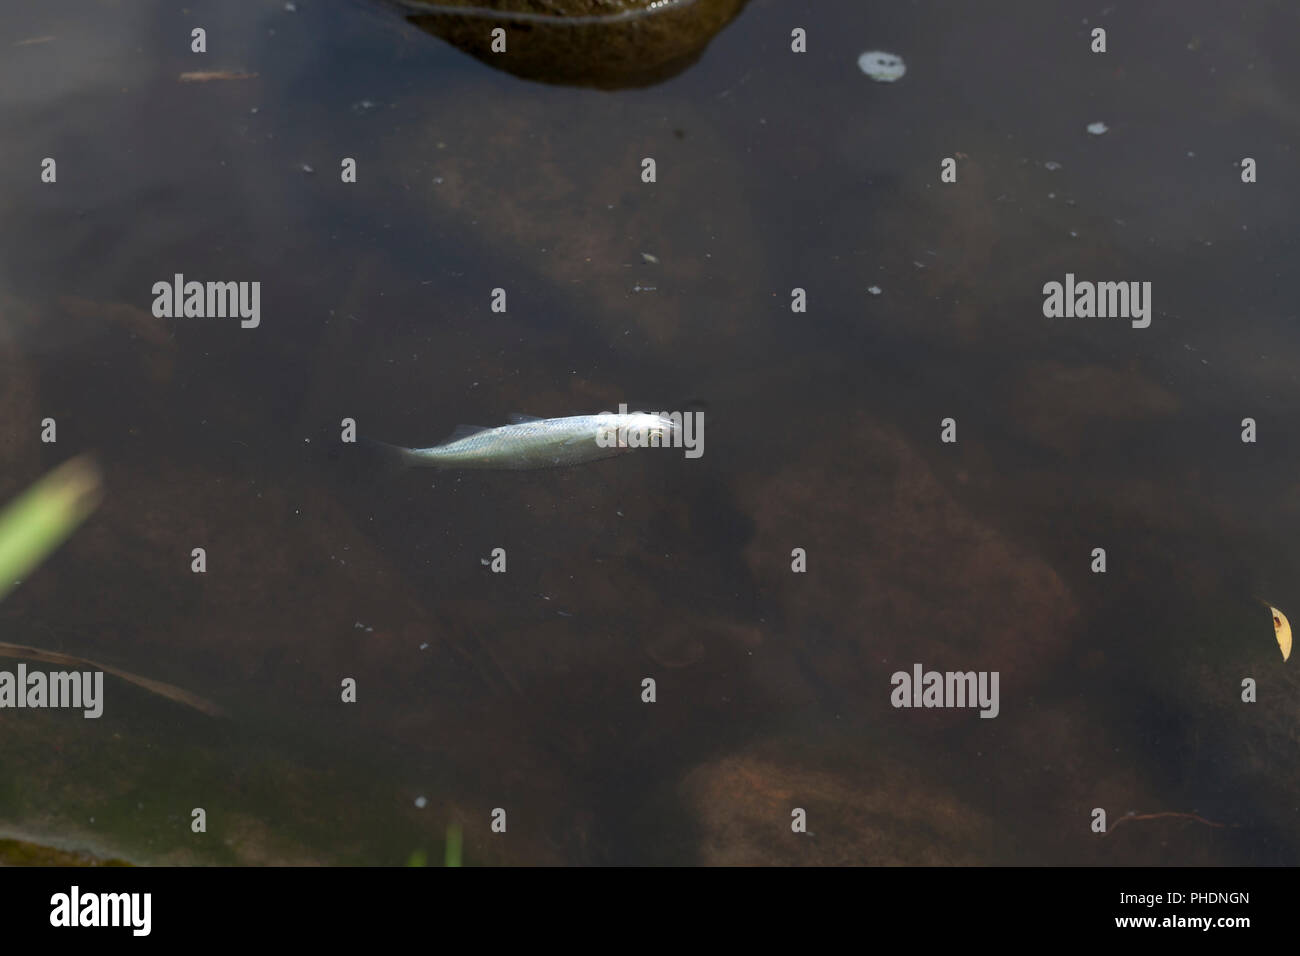 a small dead fish floating in the dirty water, closeup Stock Photo